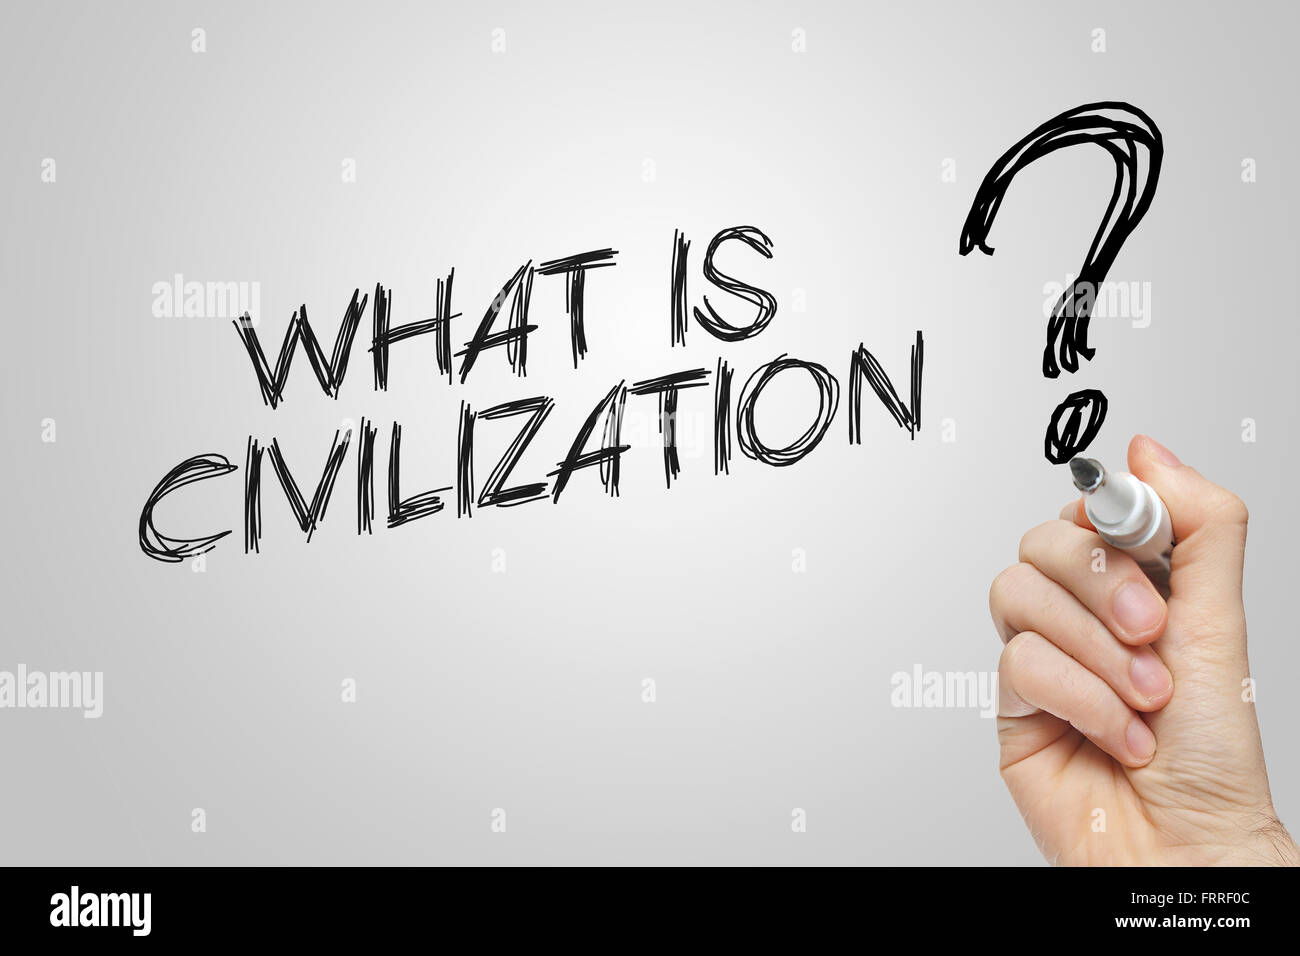 Hand writing what is civilization on grey background Stock Photo